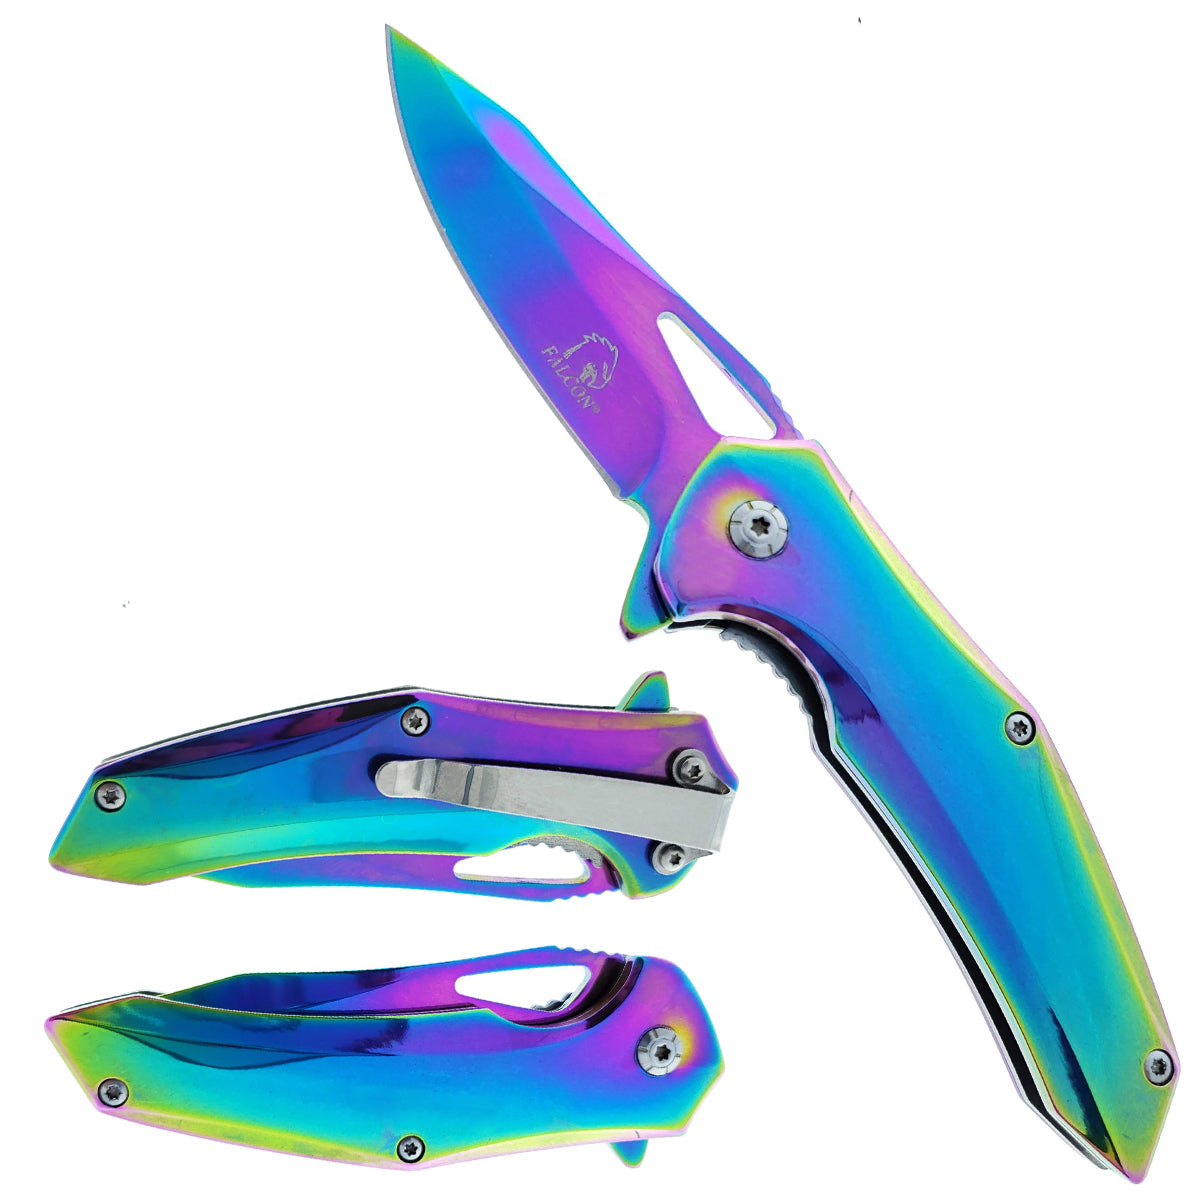 Falcon 6" Overall Rainbow Spring Assisted Knife w/Belt Clip